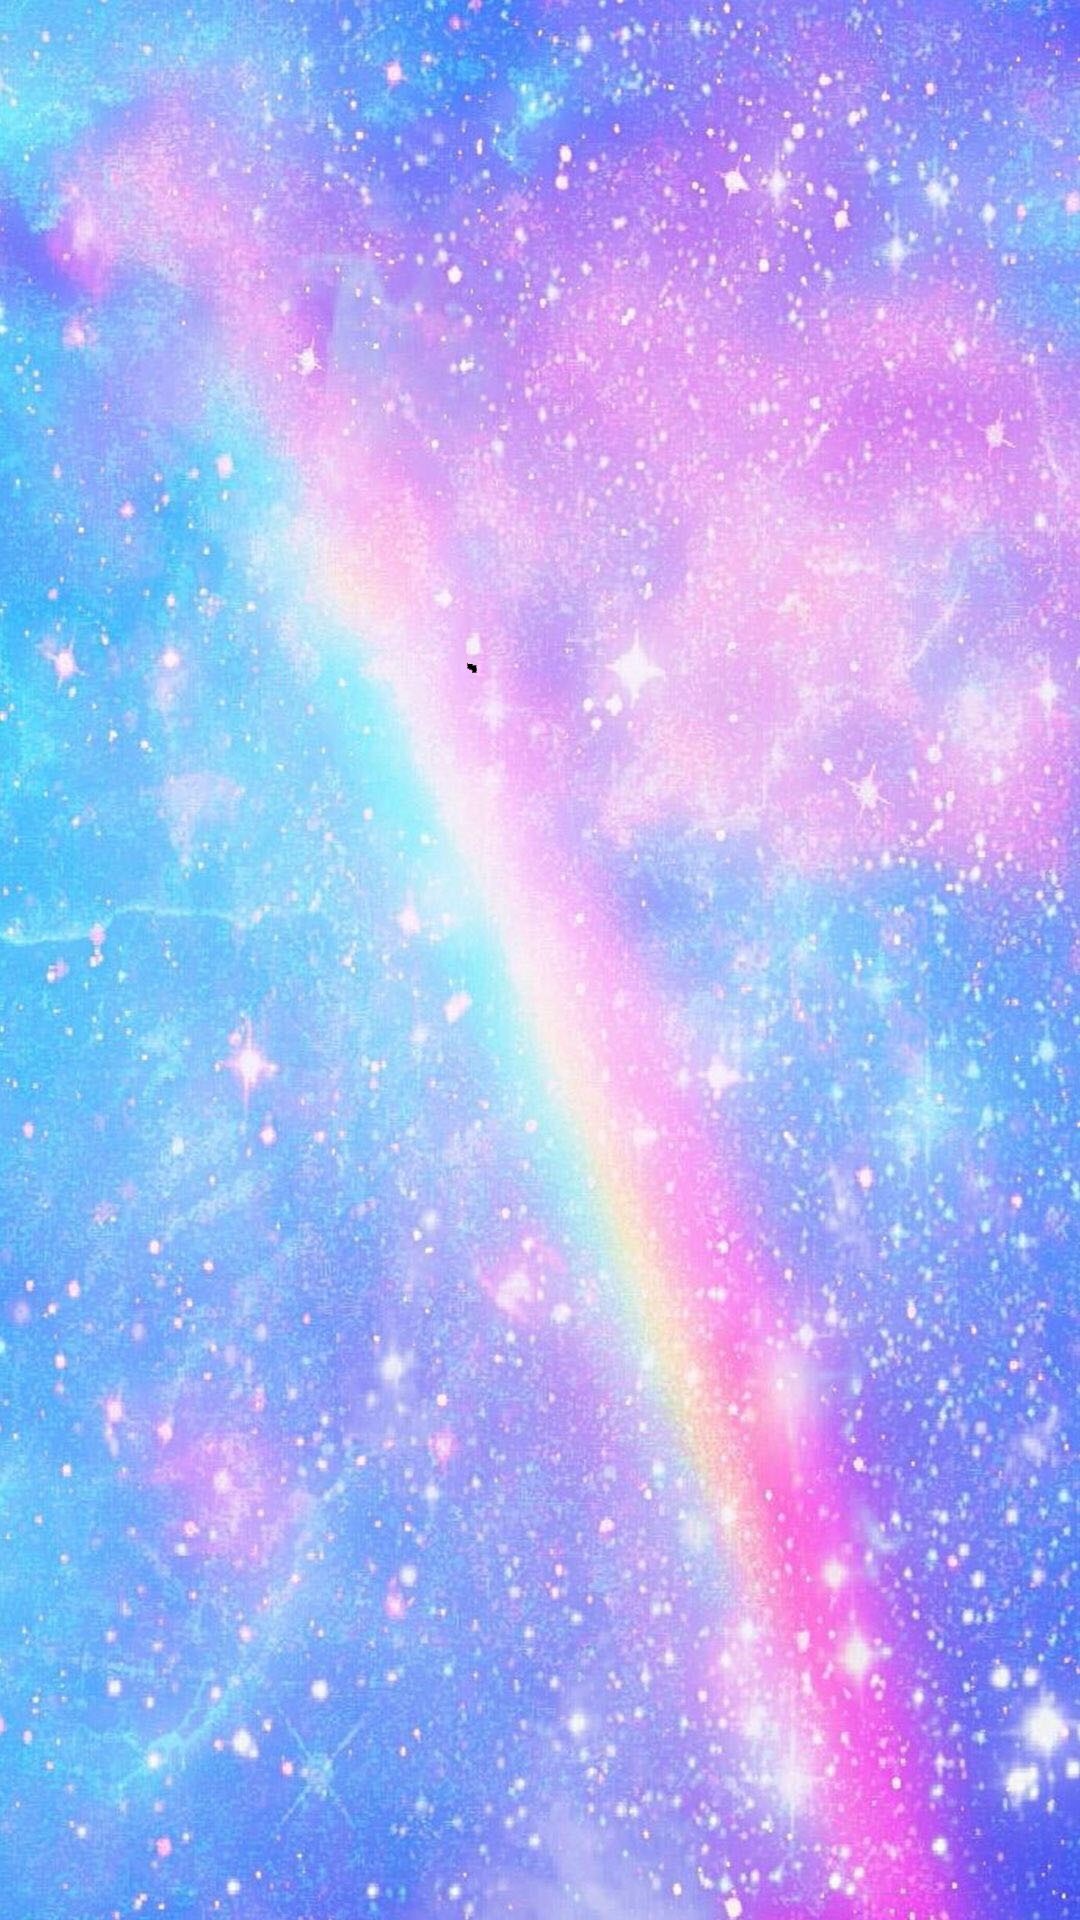 1080x1920 Explore Rainbow Galaxy, Backgrounds For Iphone, and more!